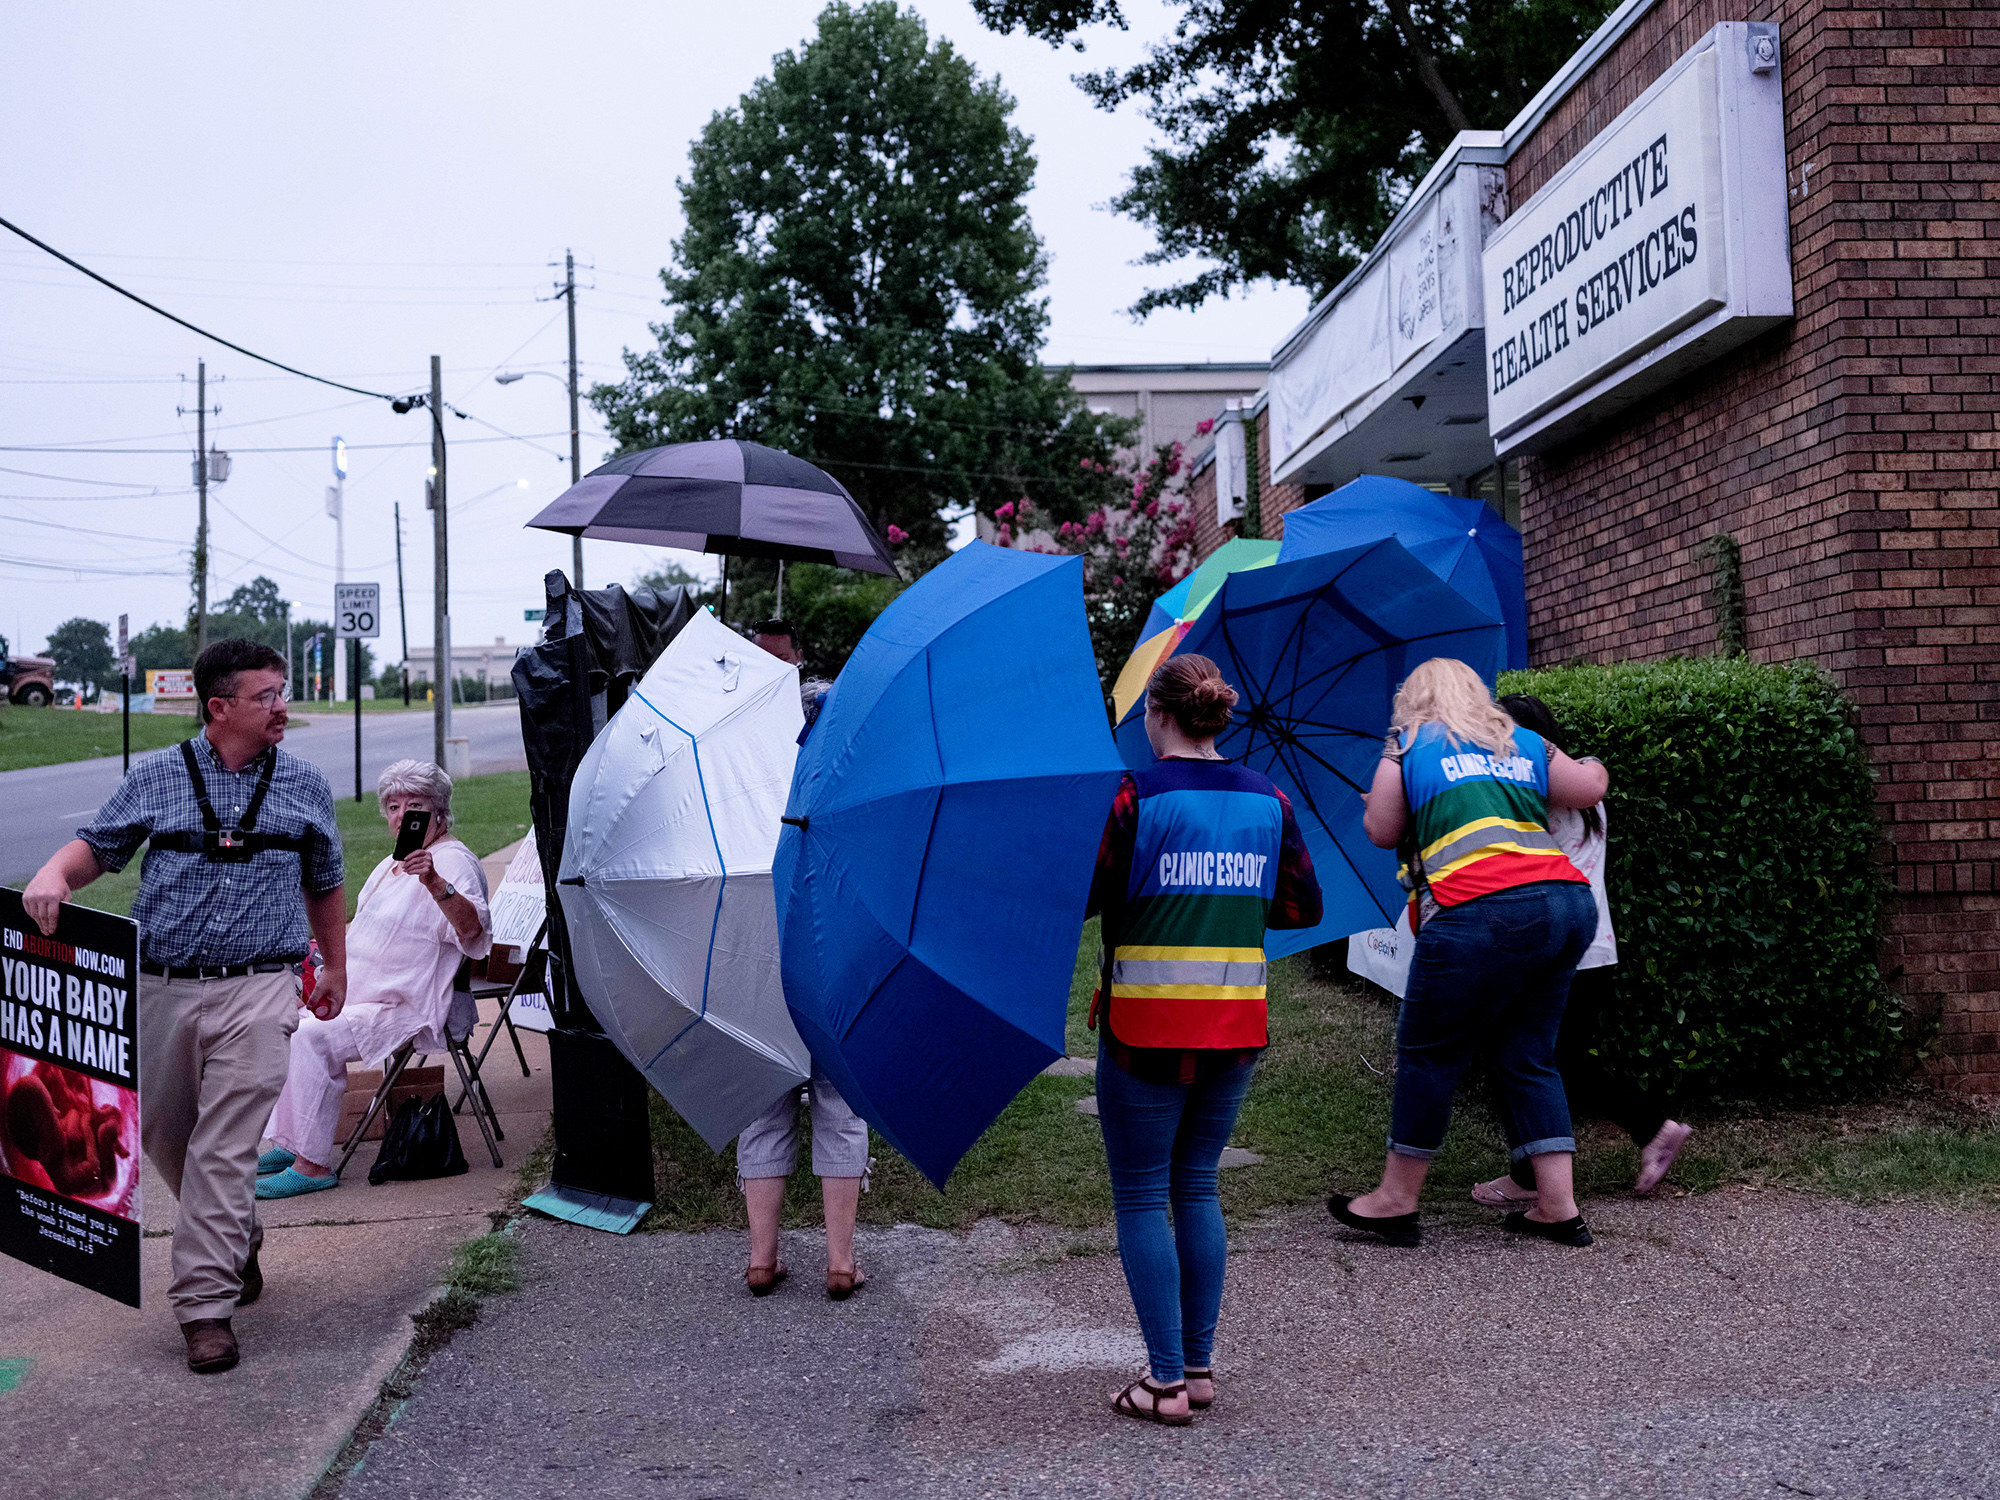 A group of people carry large umbrellas to shield patients from a man carrying a sign with a photo of a nearly full term fetus that says your baby has a name